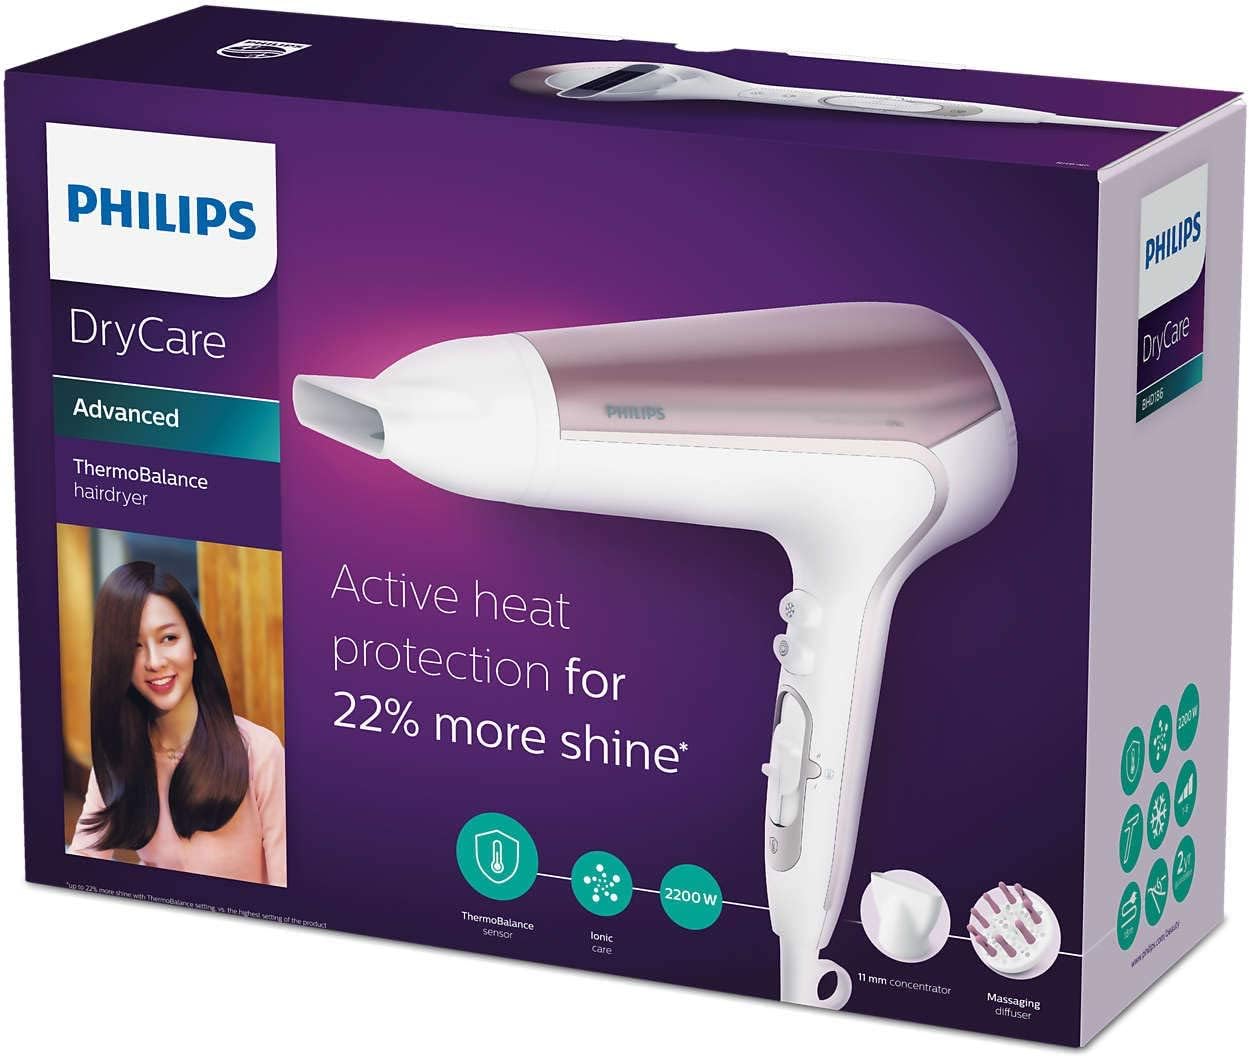 Philips DryCare Advanced Hair Dryer. 2200W. ThermoBalance. 3 heat and 2 speed settings. Cool Shot. 3 pin, BHD186/03